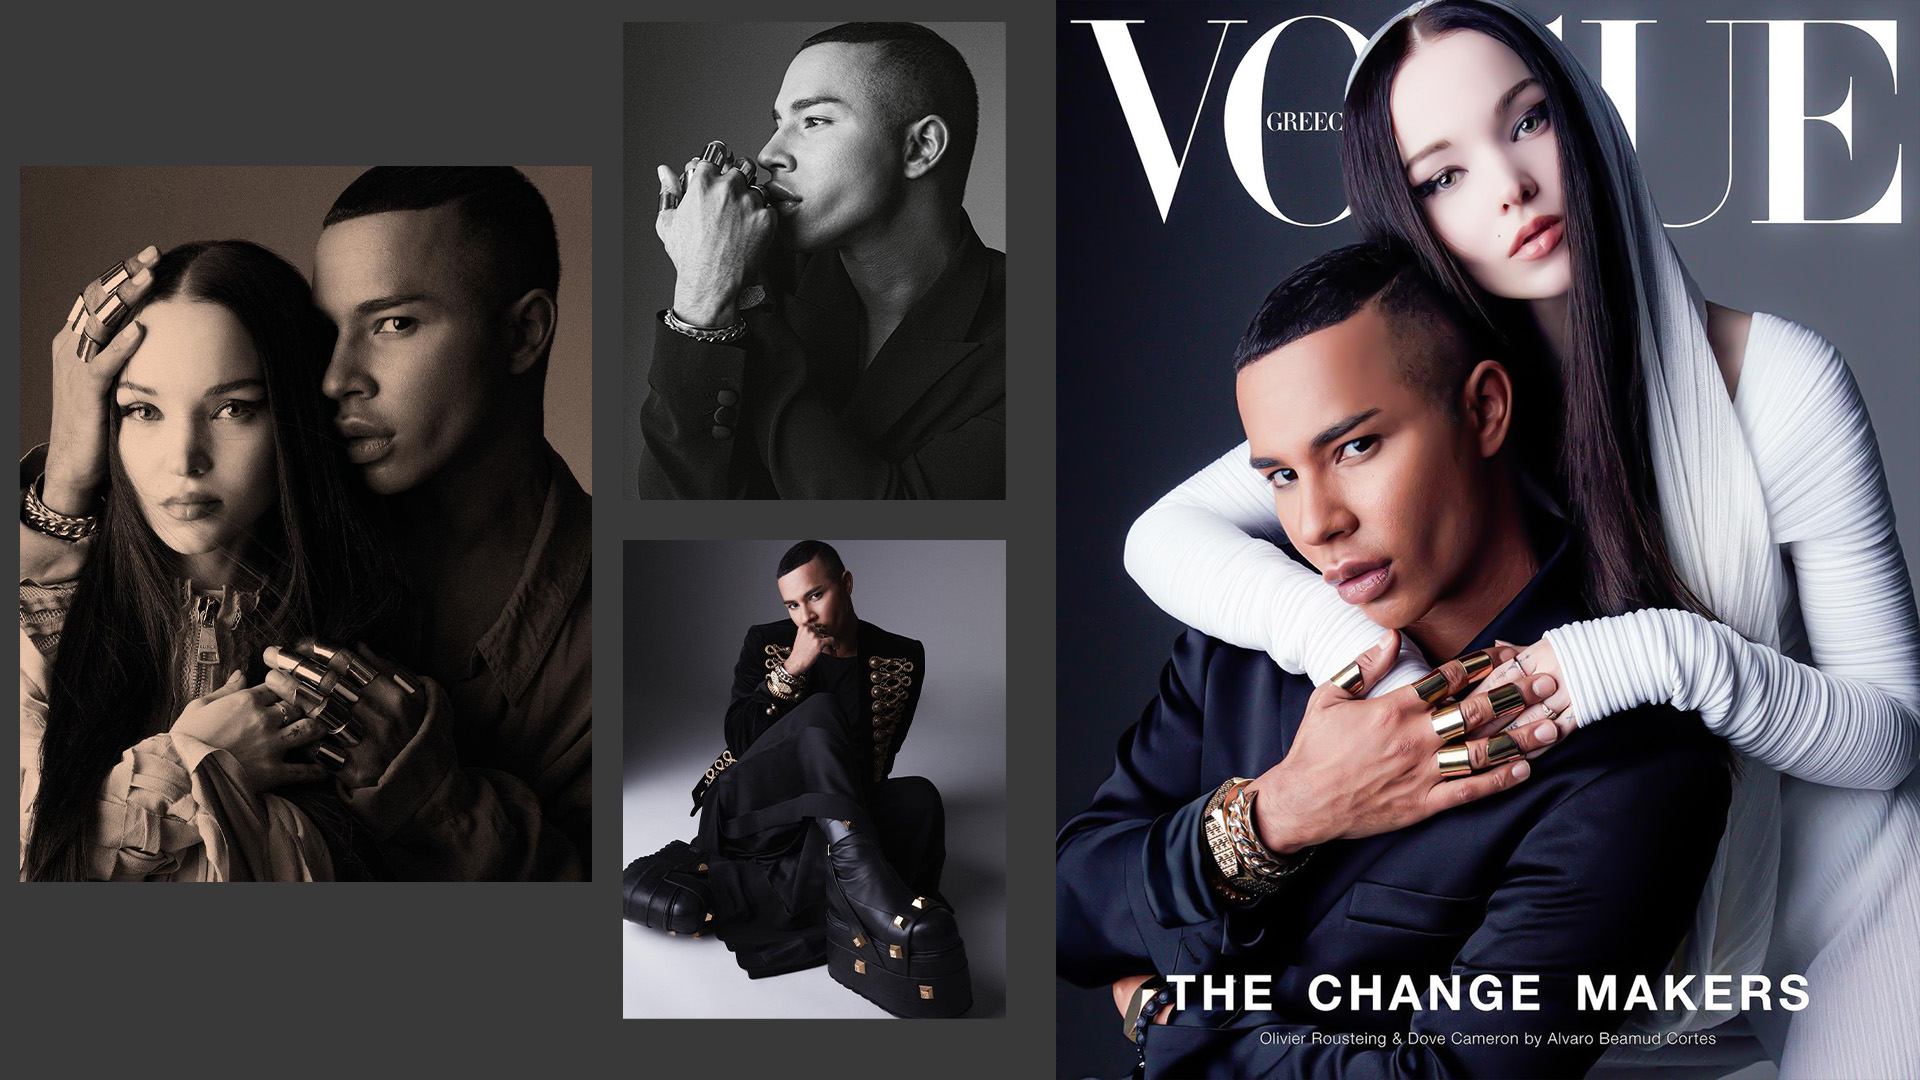 DOVE Cameron and OLIVIER Rousteing on Cover Page of Vogue Greece ...